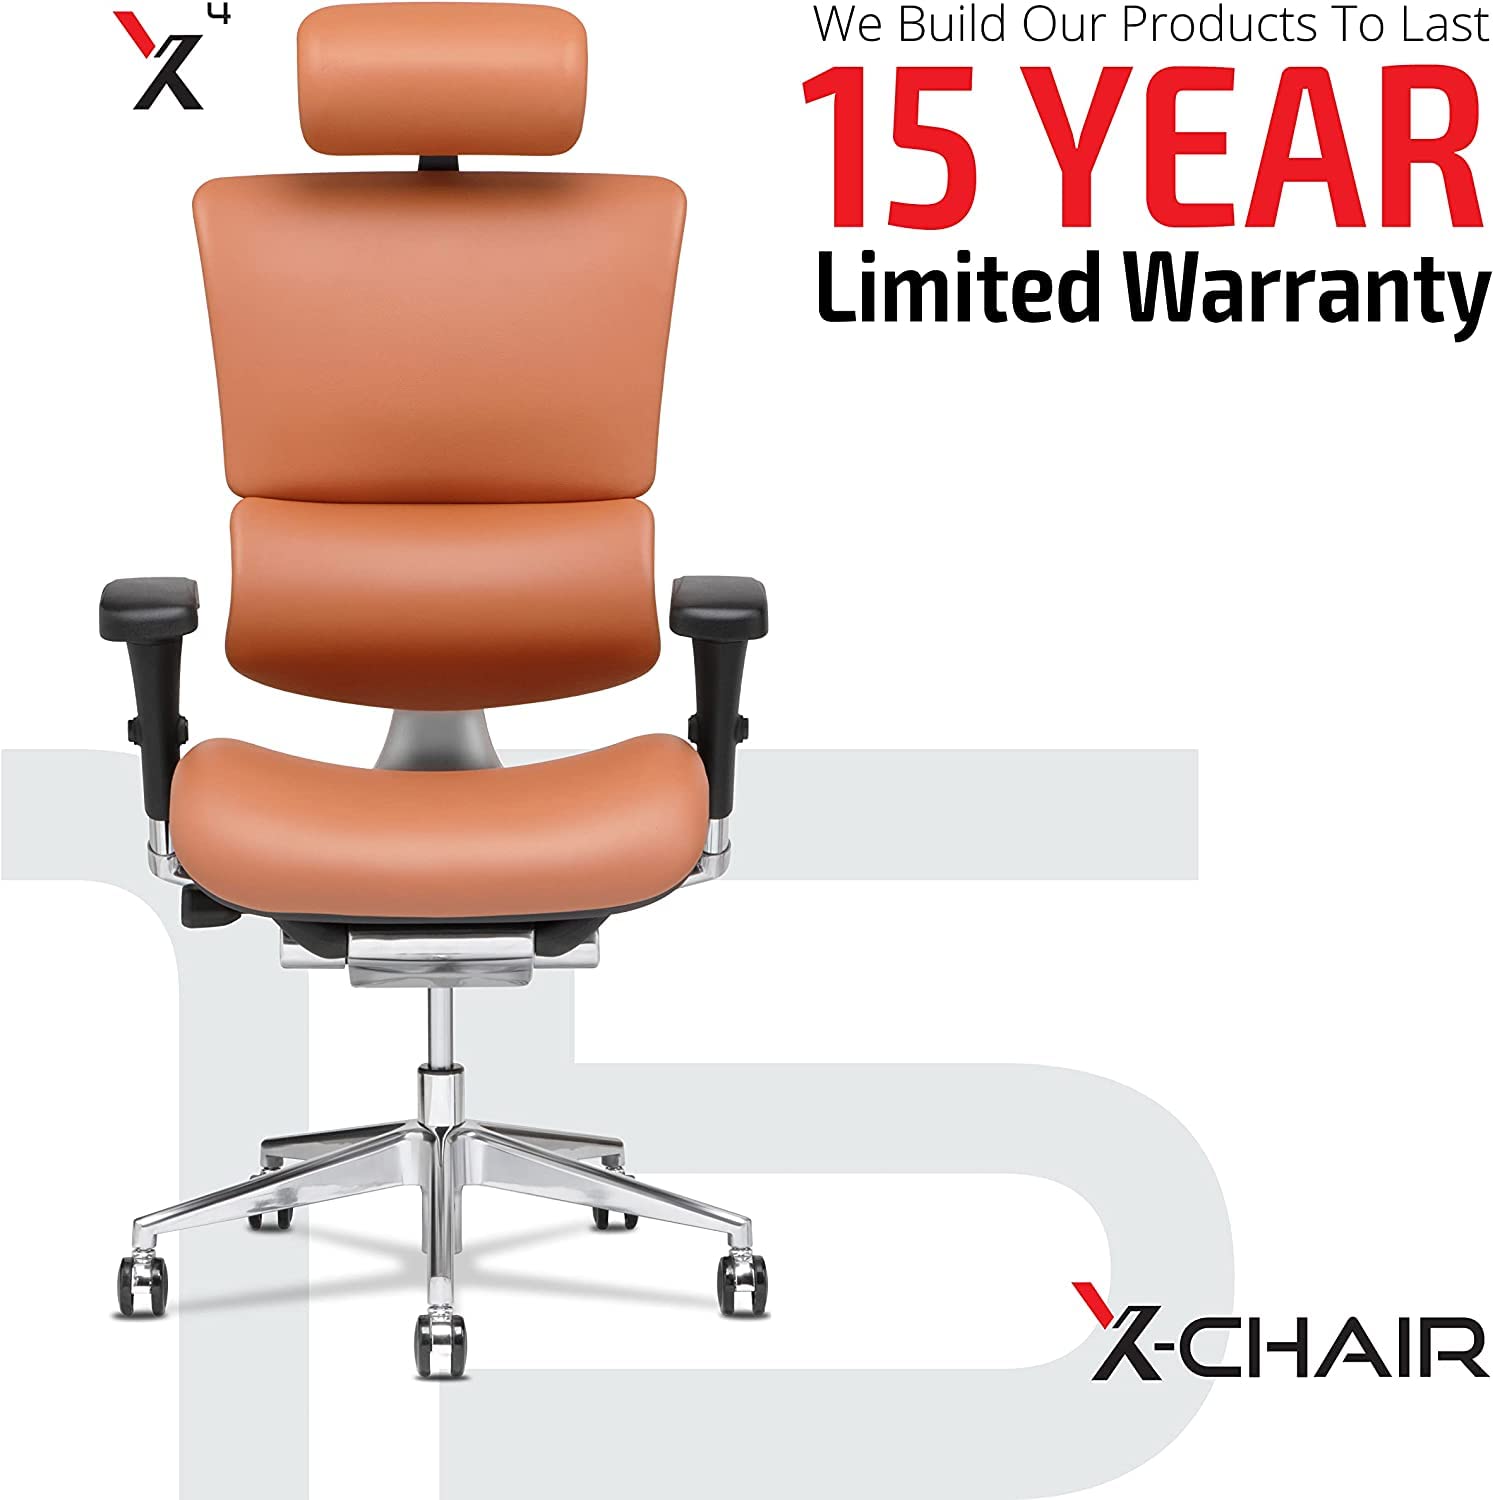 X-Chair X4 High End Executive Chair, Black Leather with Wide Seat & Headrest - Ergonomic Office Seat/Dynamic Variable Lumbar Support/Floating Recline/Stunning Aesthetic/Perfect for Office or Boardroom